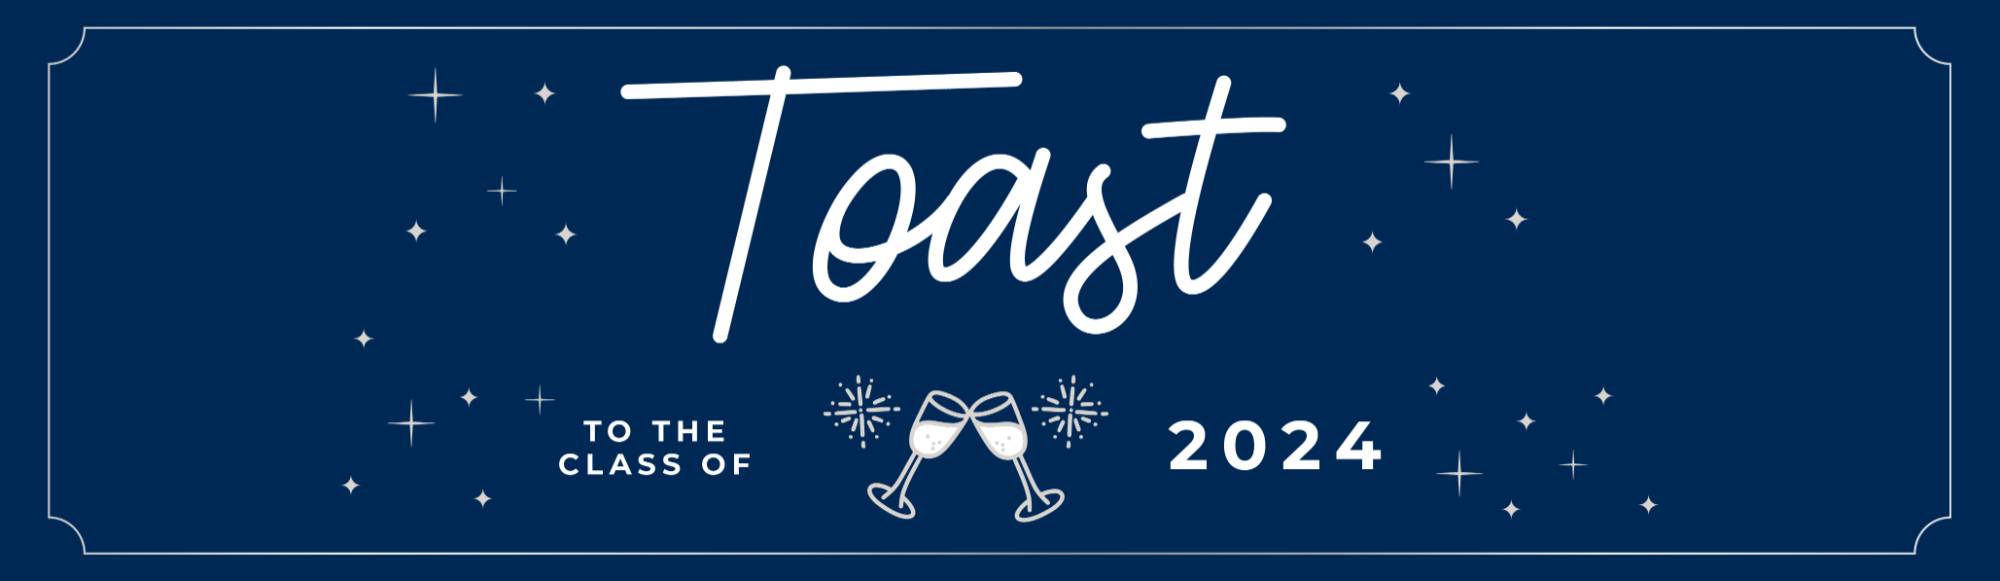 Toast to the Class of 2024